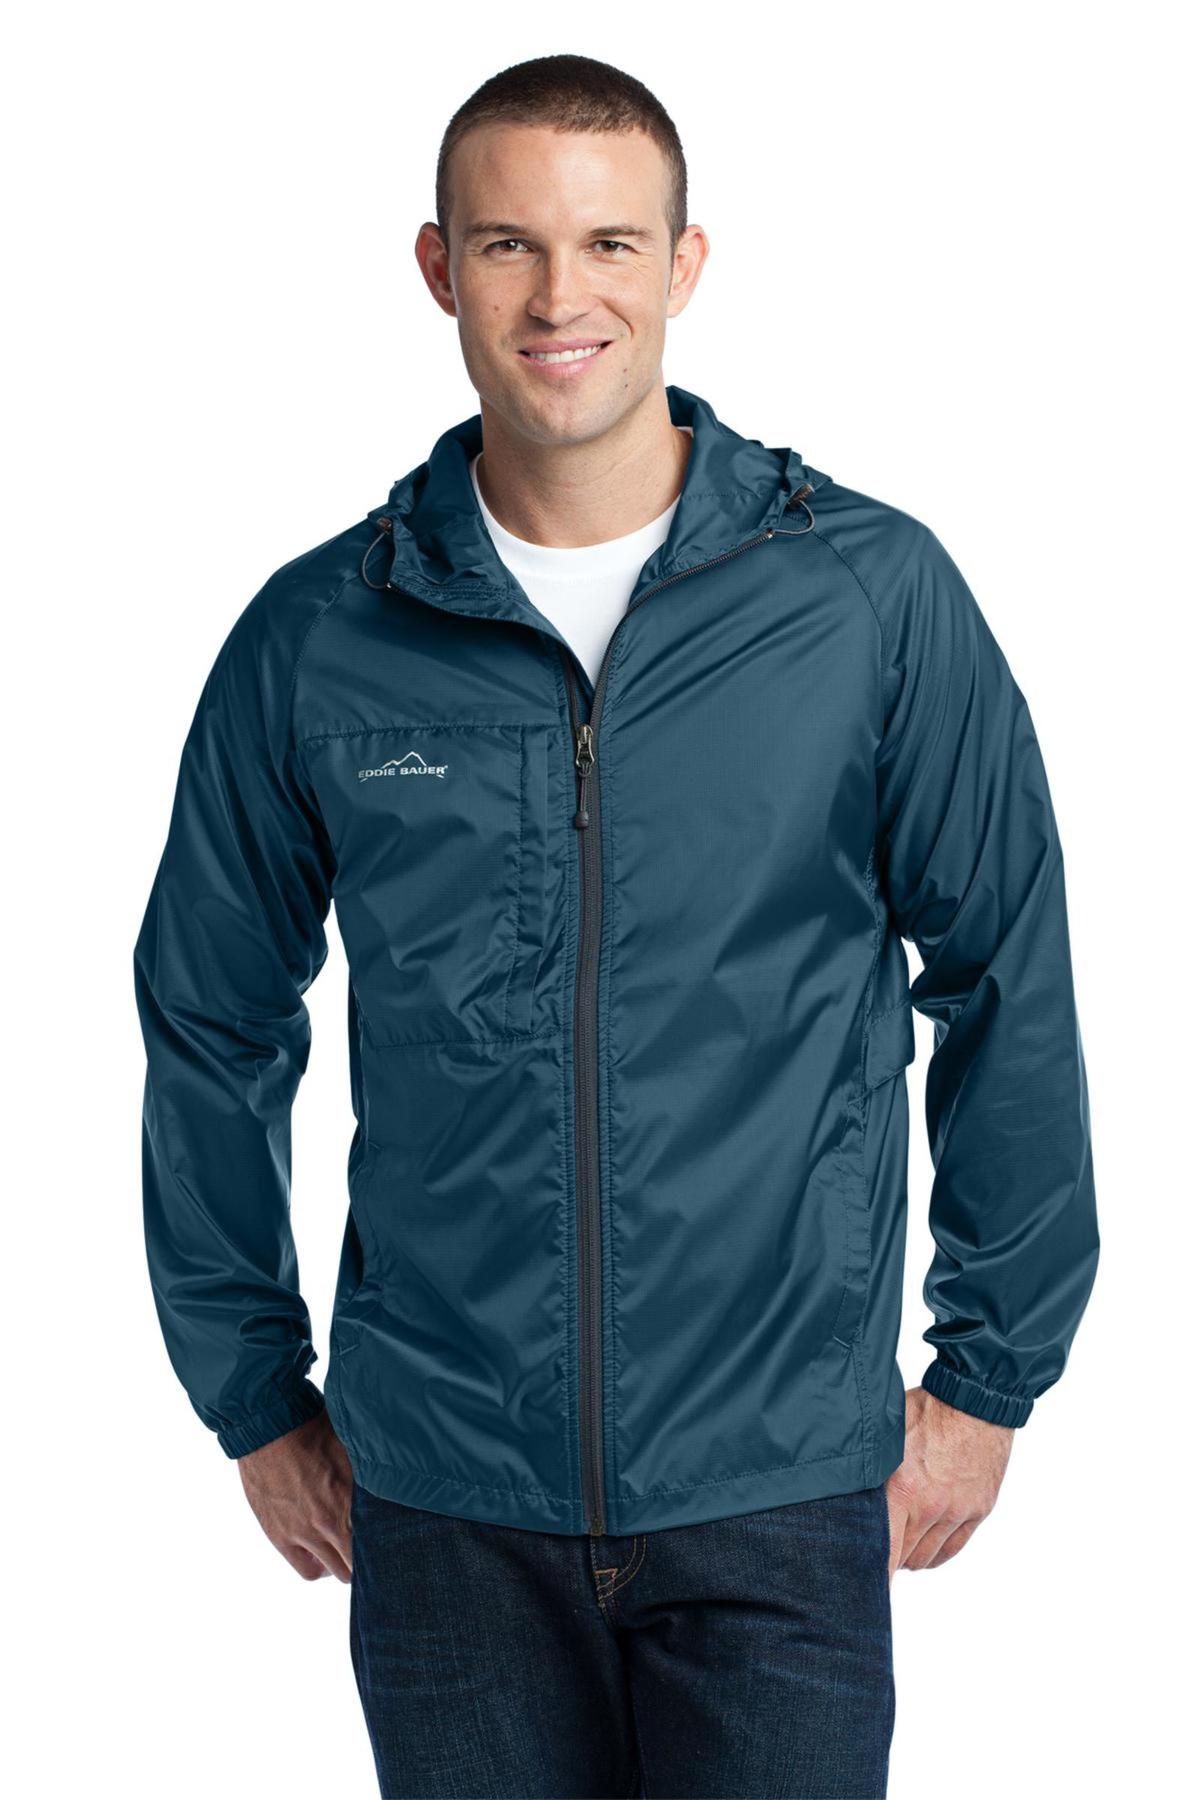 Eddie Bauer Embroidered Men's Packable Shell Jacket - Queensboro